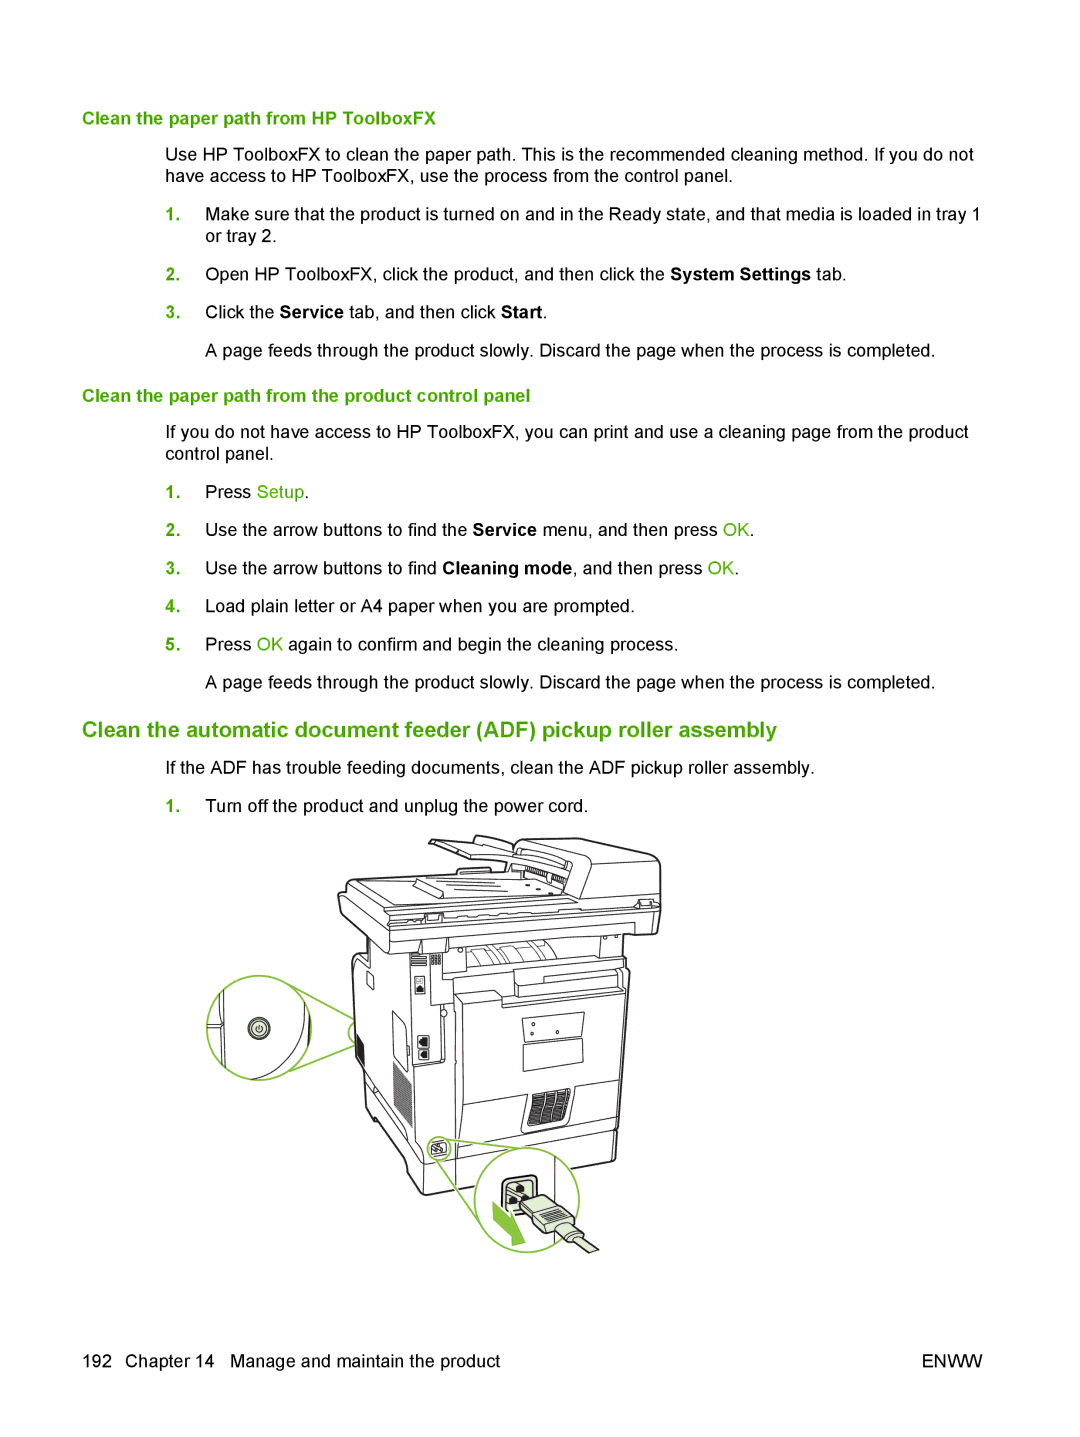 HP CM2320 manual Clean the paper path from HP ToolboxFX, Clean the paper path from the product control panel 